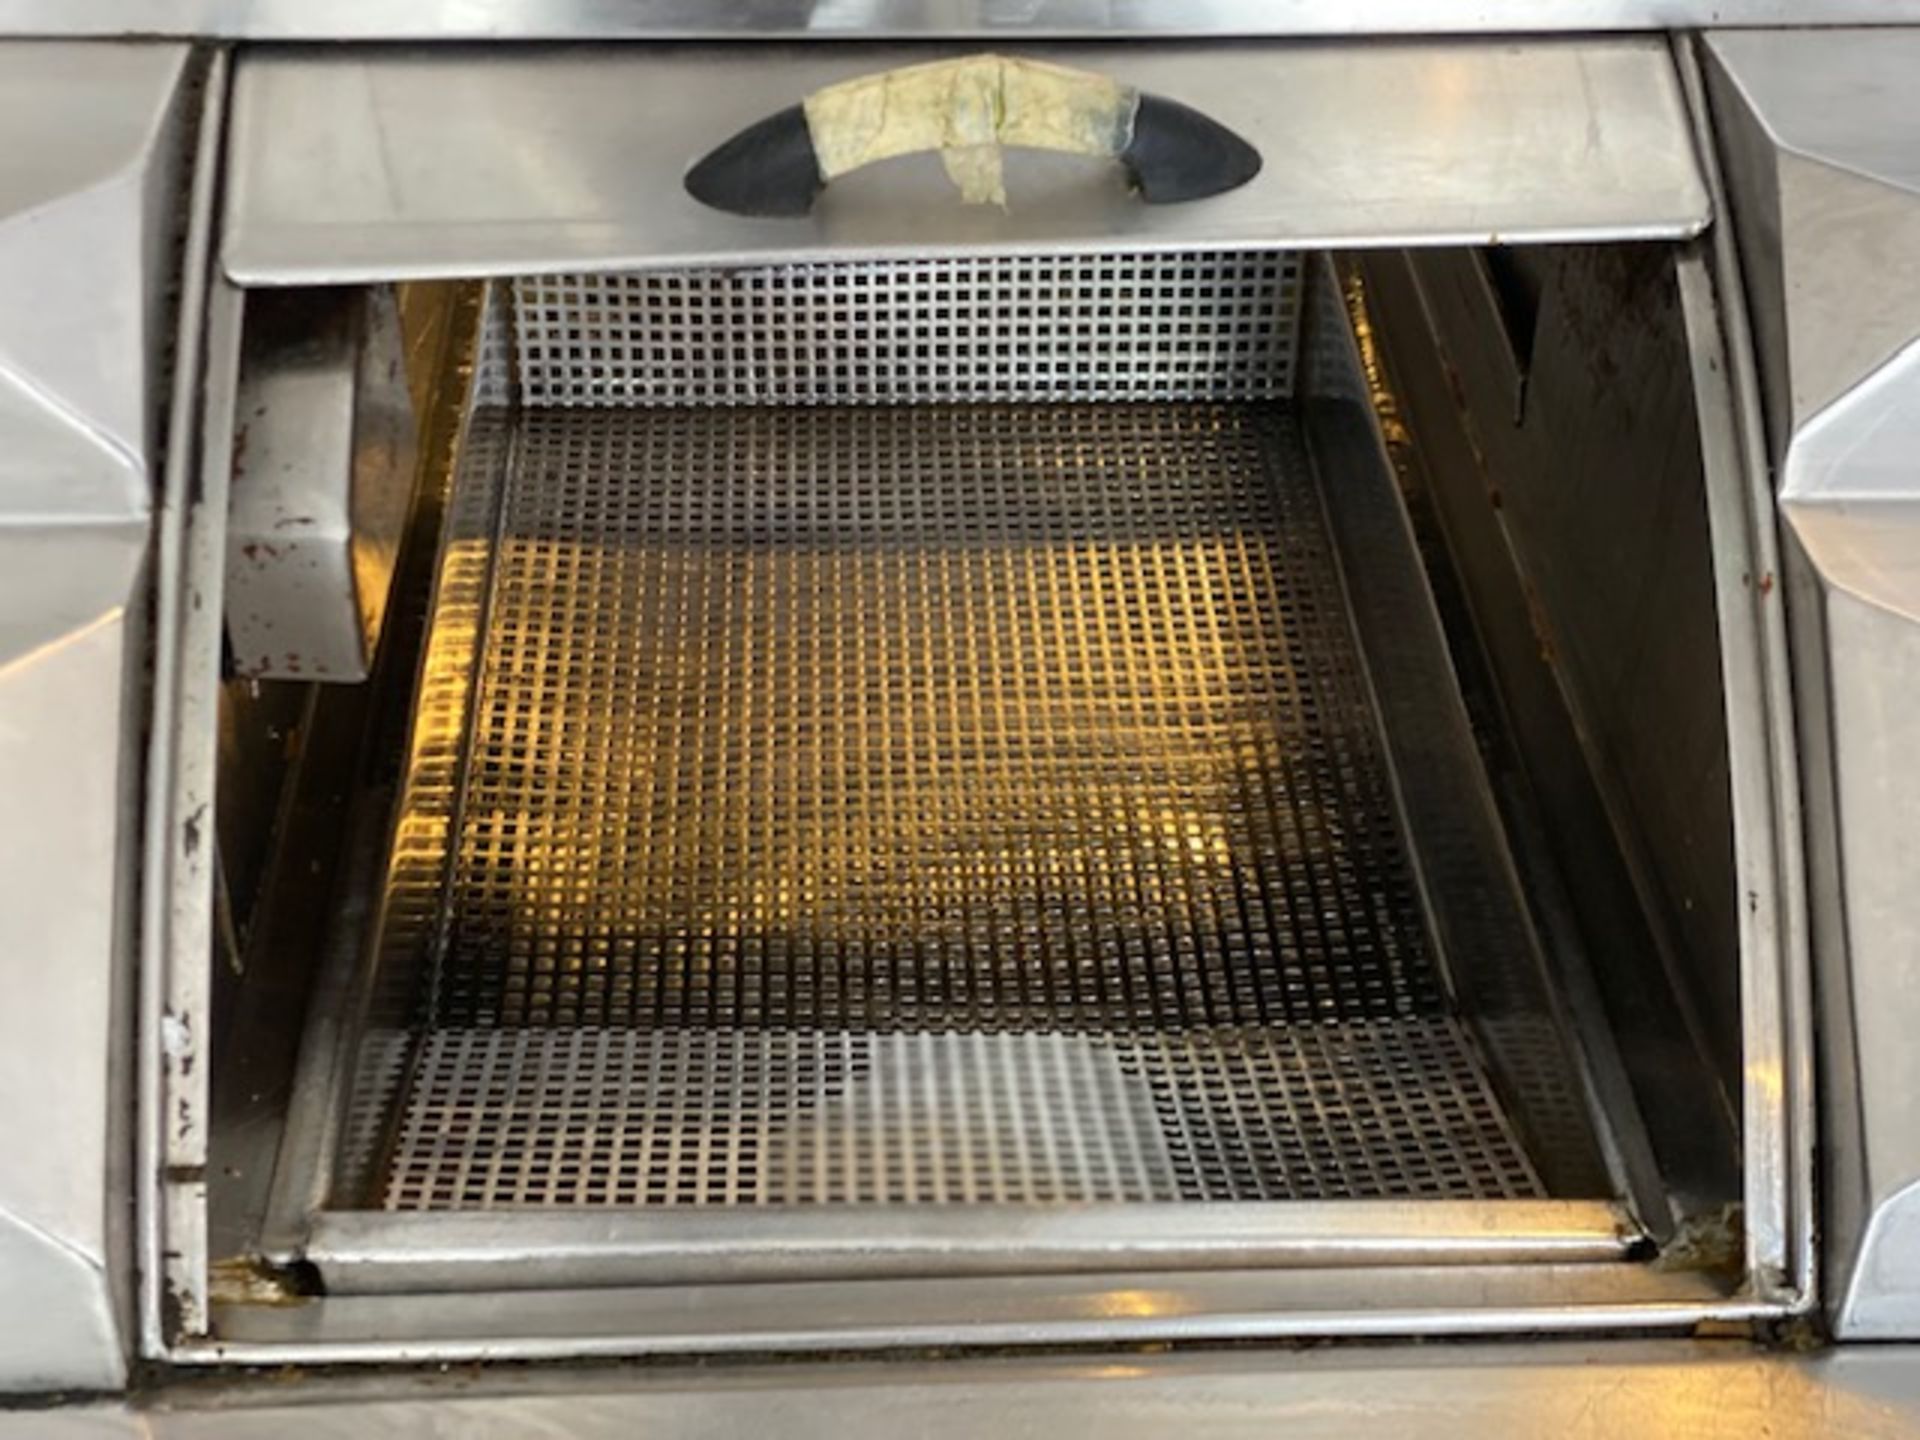 Hot Hold Display Unit With Fish Fryer - Image 6 of 6